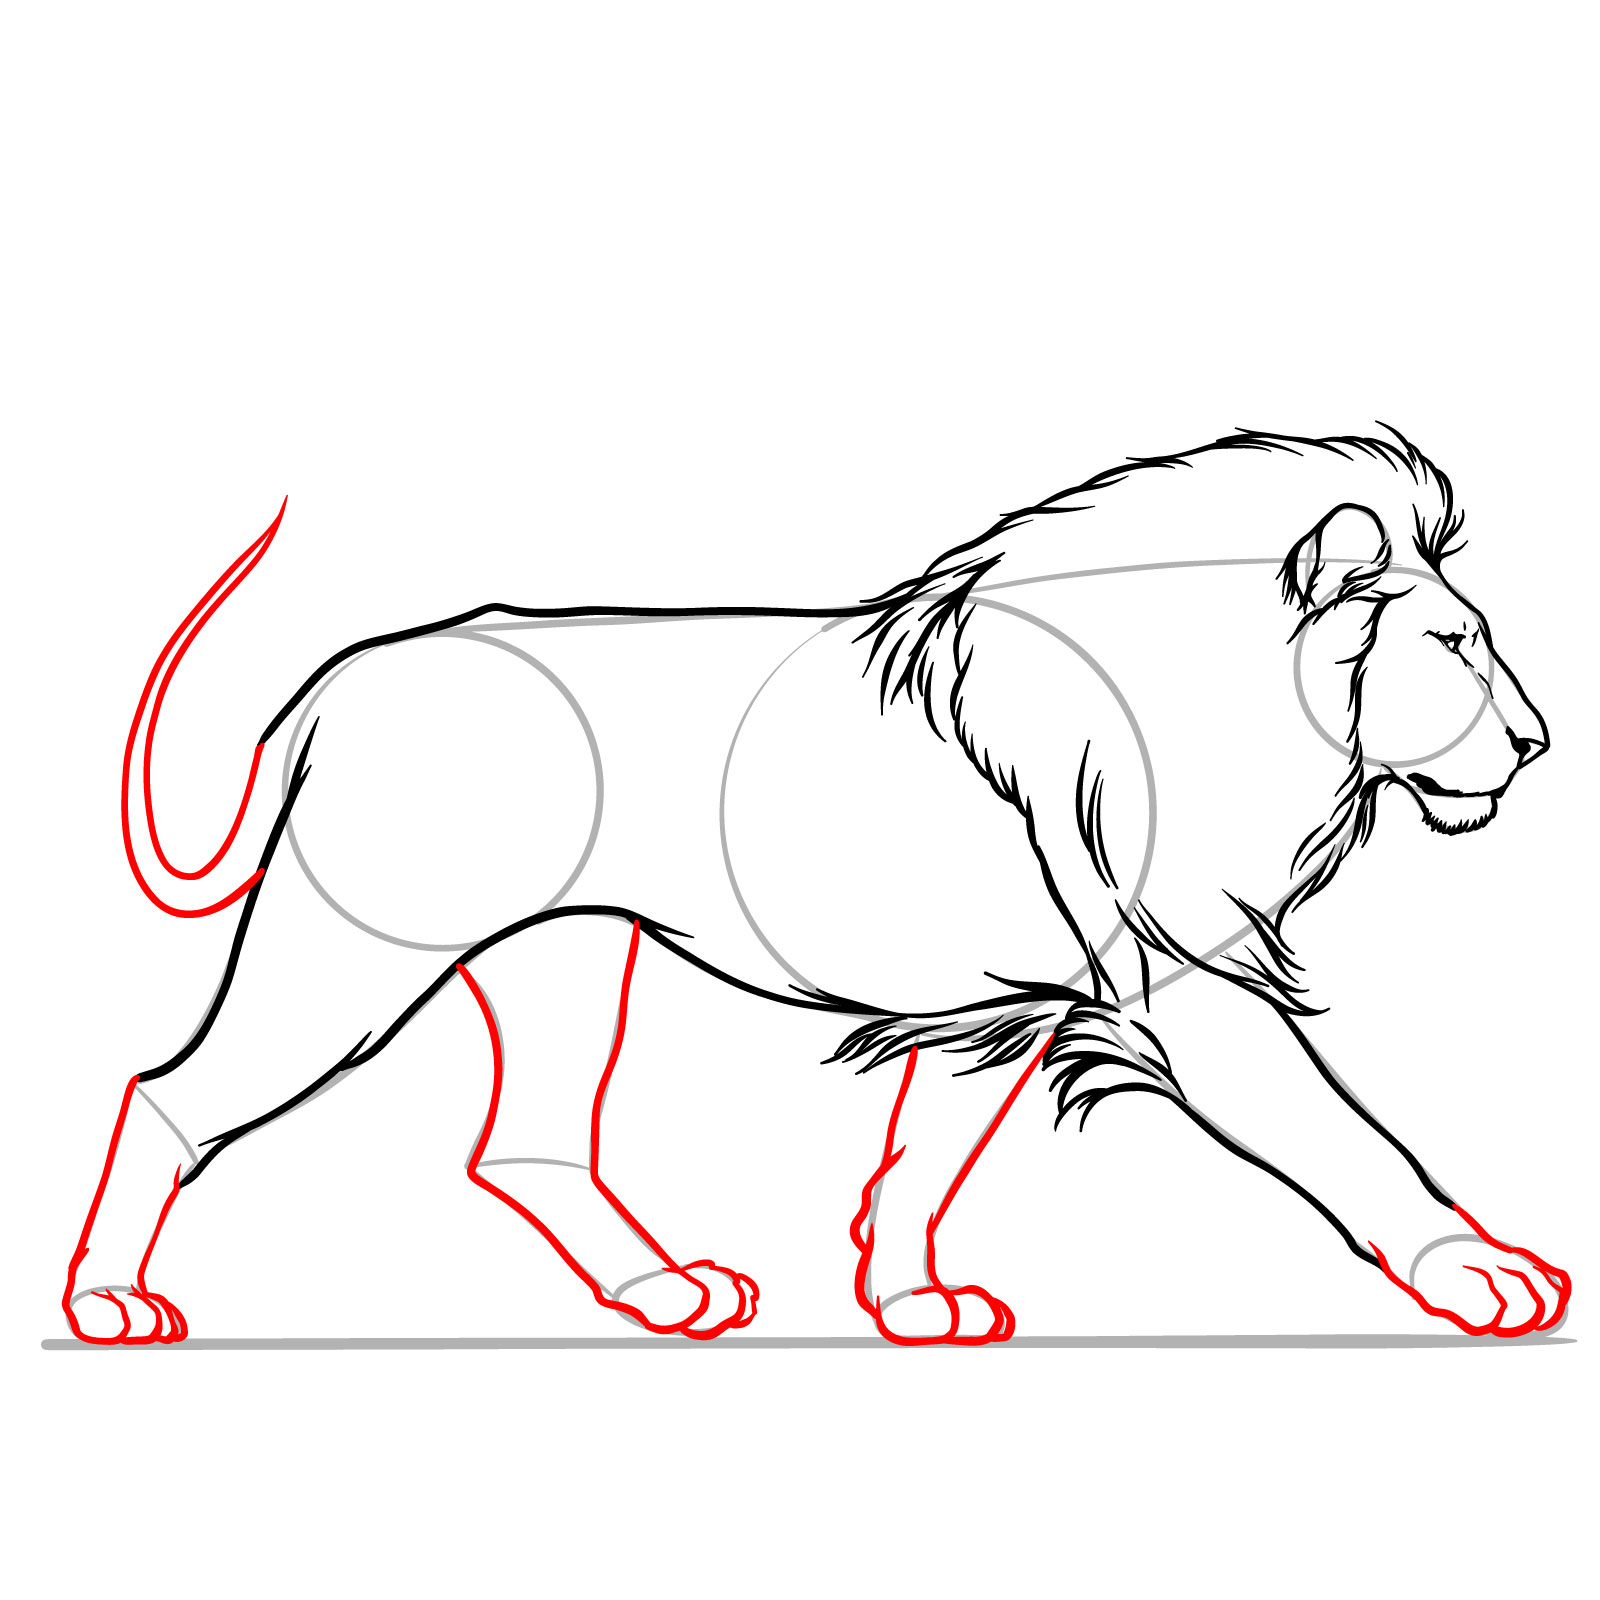 How to draw the remaining legs and tail of a walking lion in side view - step 10